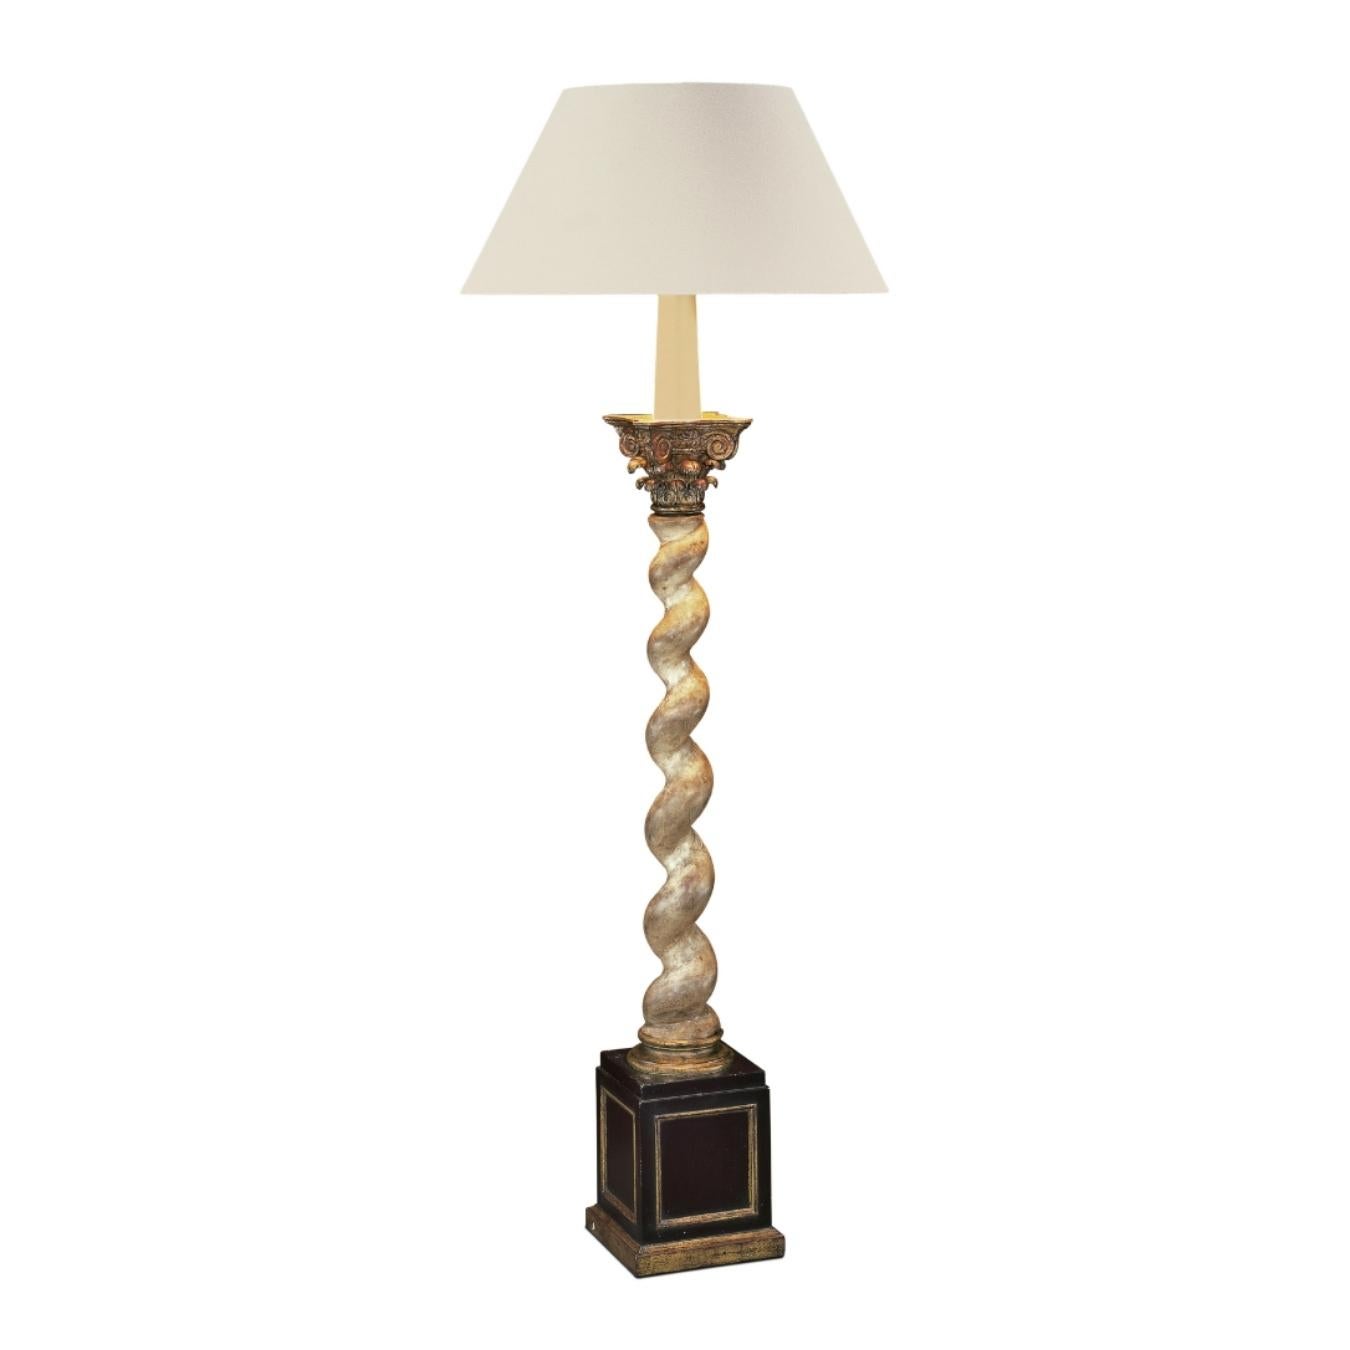 Salomonic Twist Lamp Inspired by Columns with Twisted Shaft & Corinthian Capital In New Condition For Sale In Bosques de las Lomas, MX